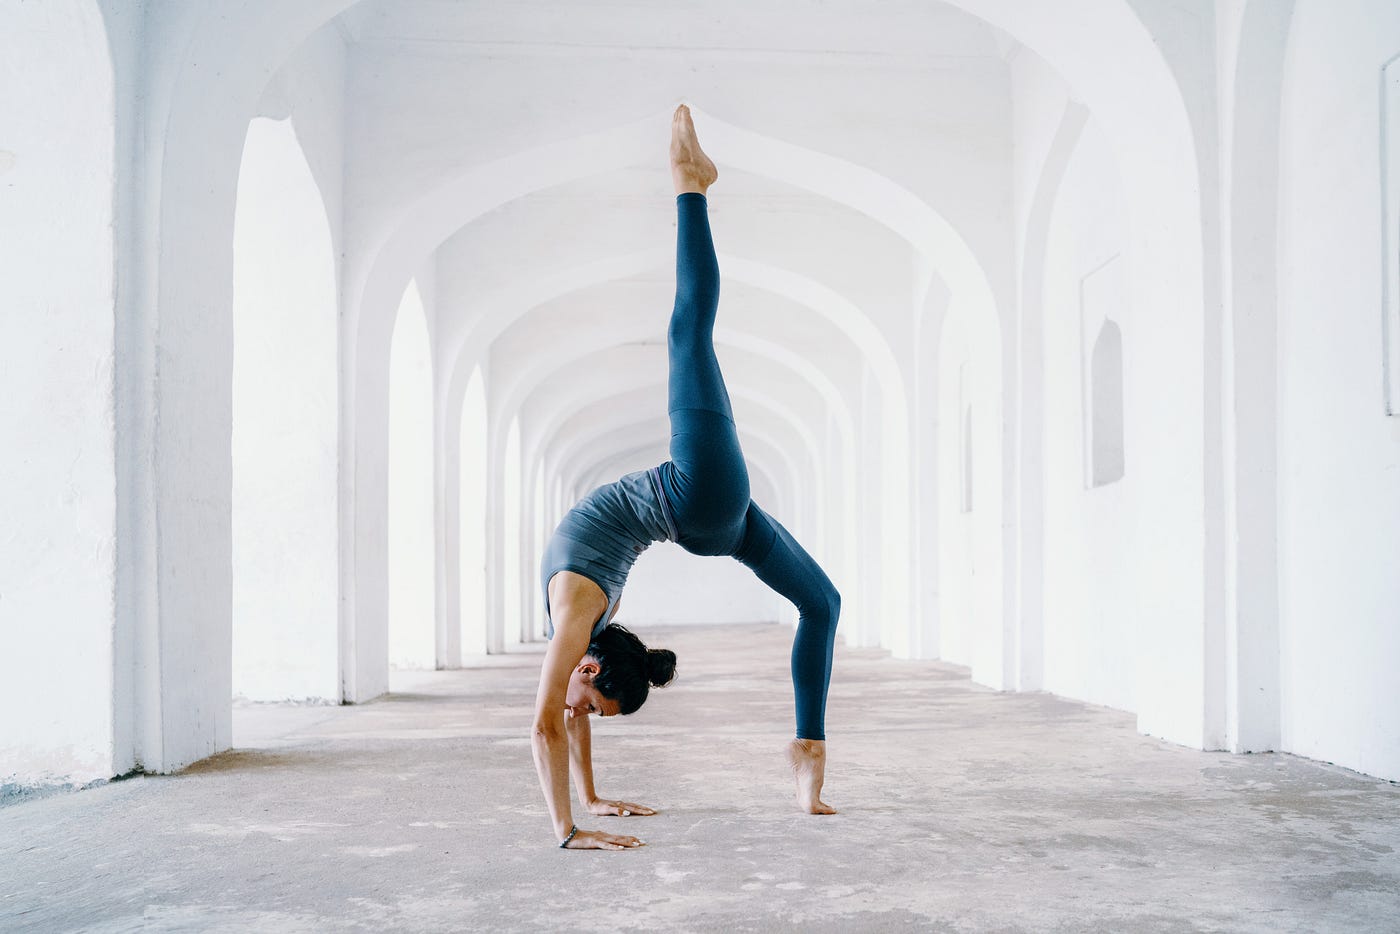 Woman performs yoga. One leg points to the ceiling as the other is en point on the ground.